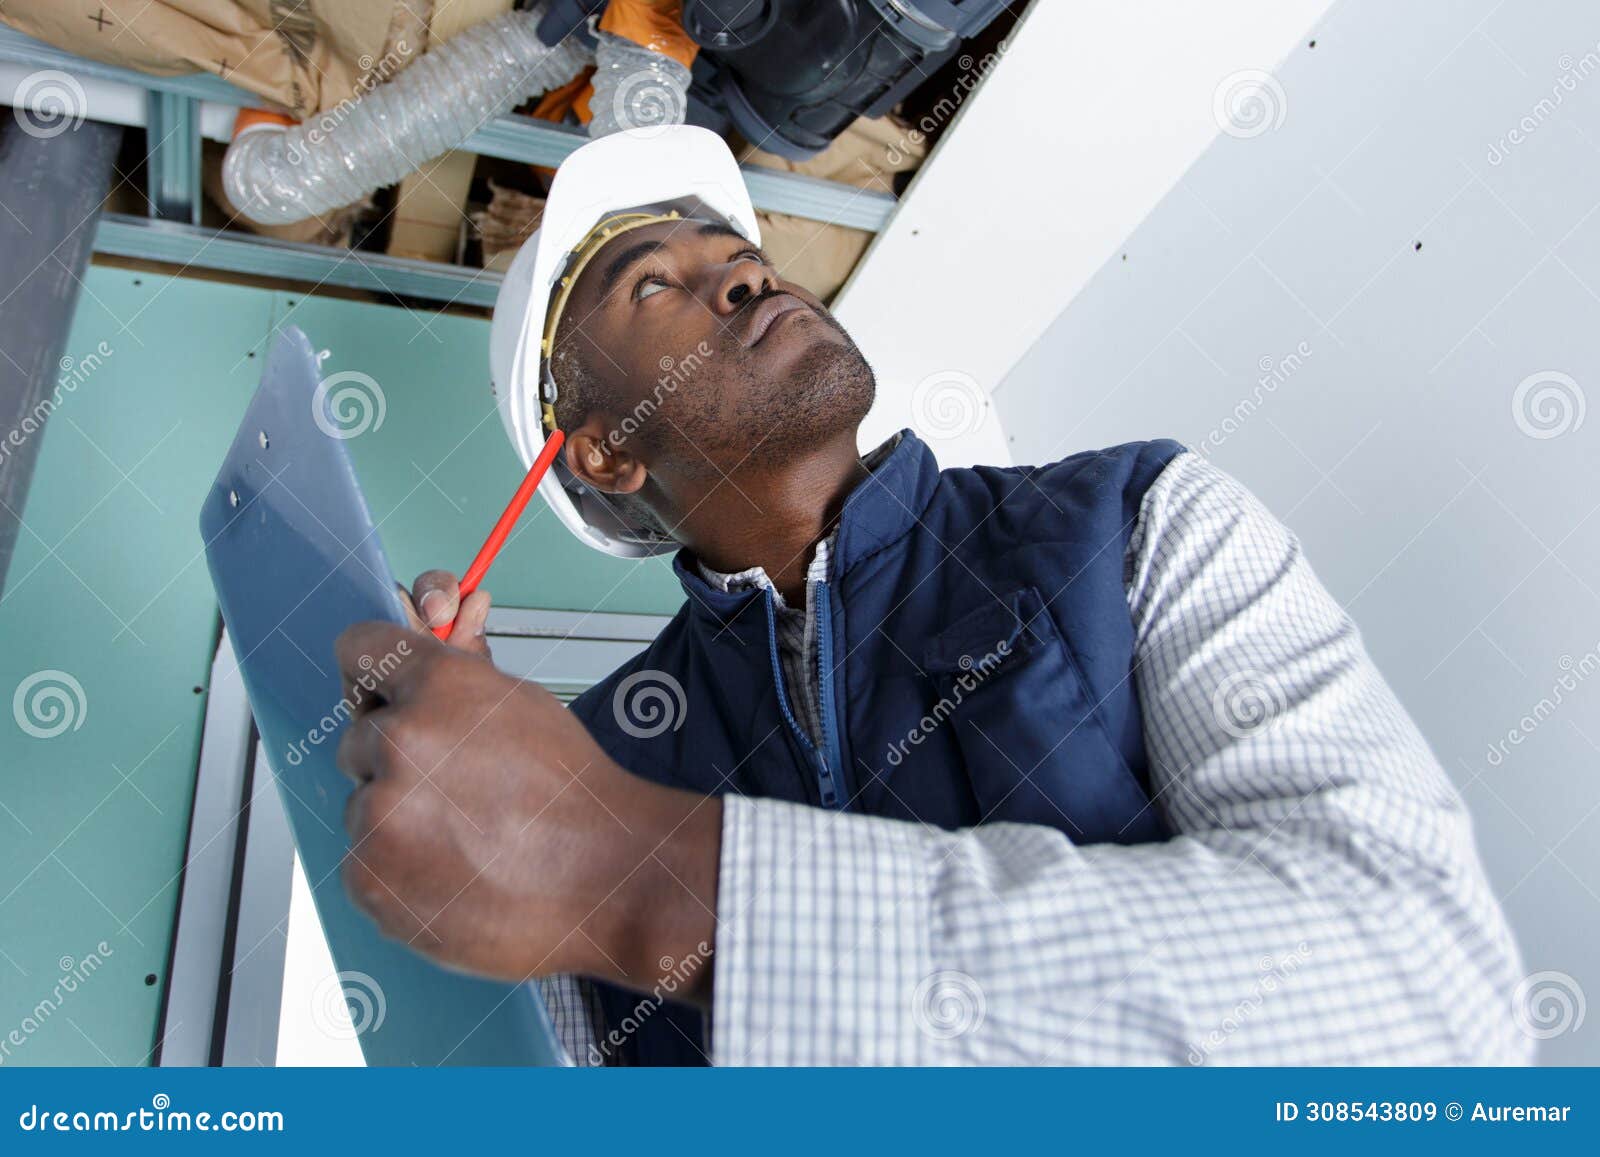 workman looking at ventilation system and making notes on clipboard